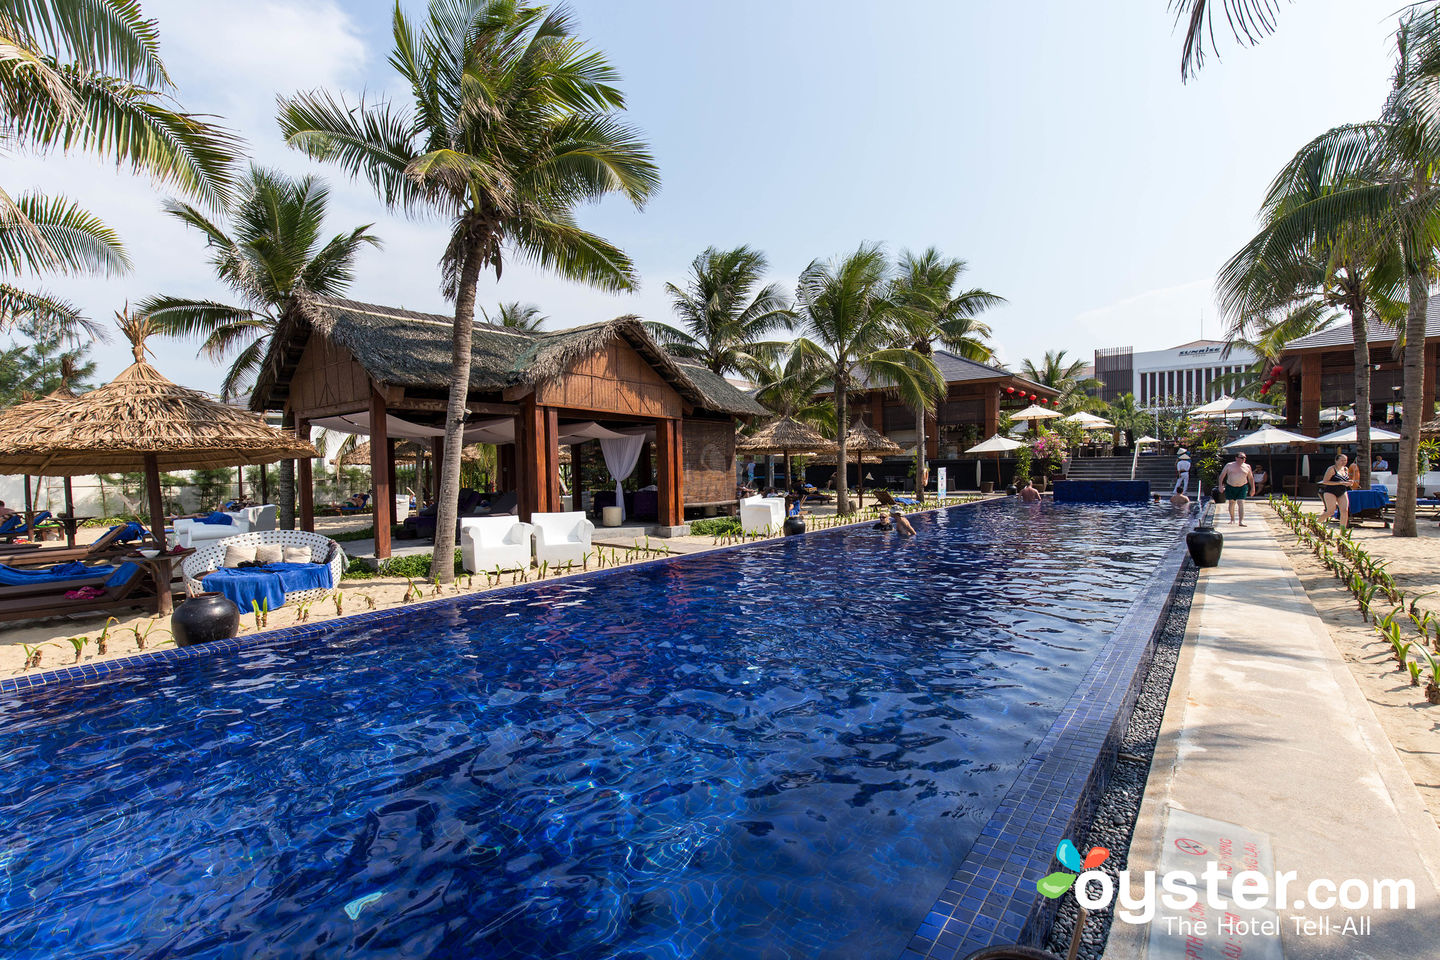 Sunrise Premium Resort Hoi An Review: What To Really Expect If You Stay